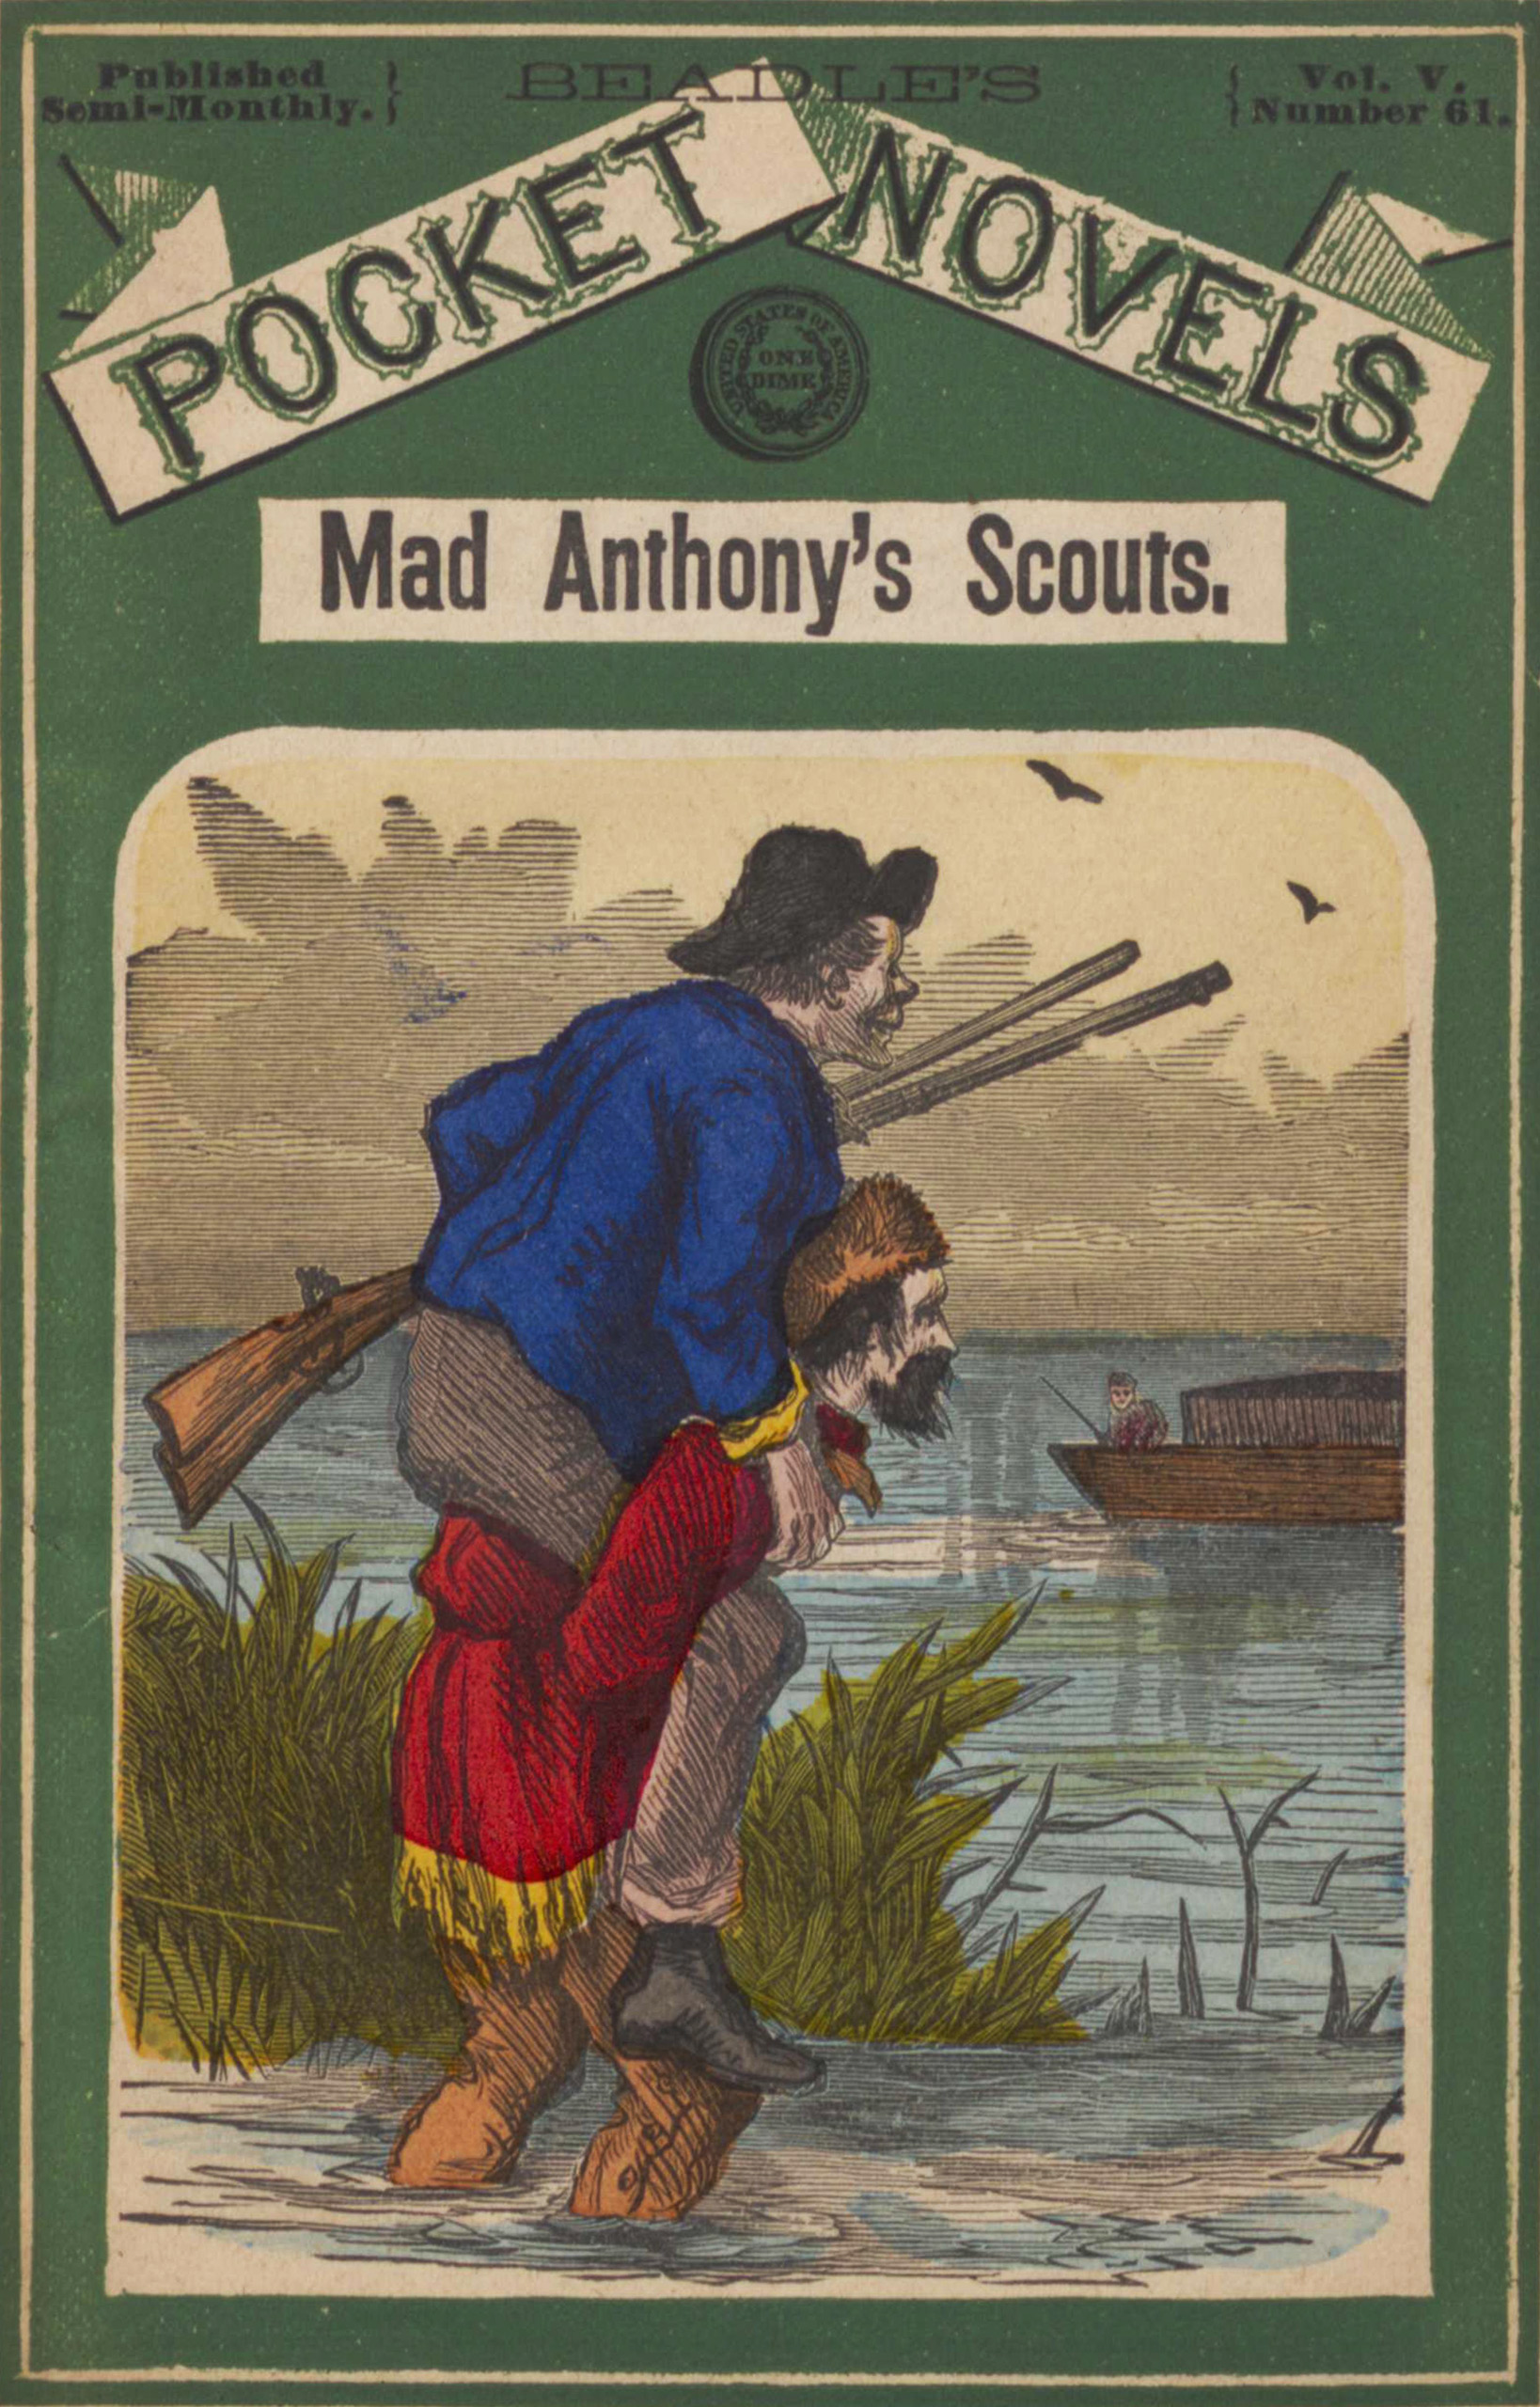 Mad Anthony's scouts; or, The rangers of Kentucky